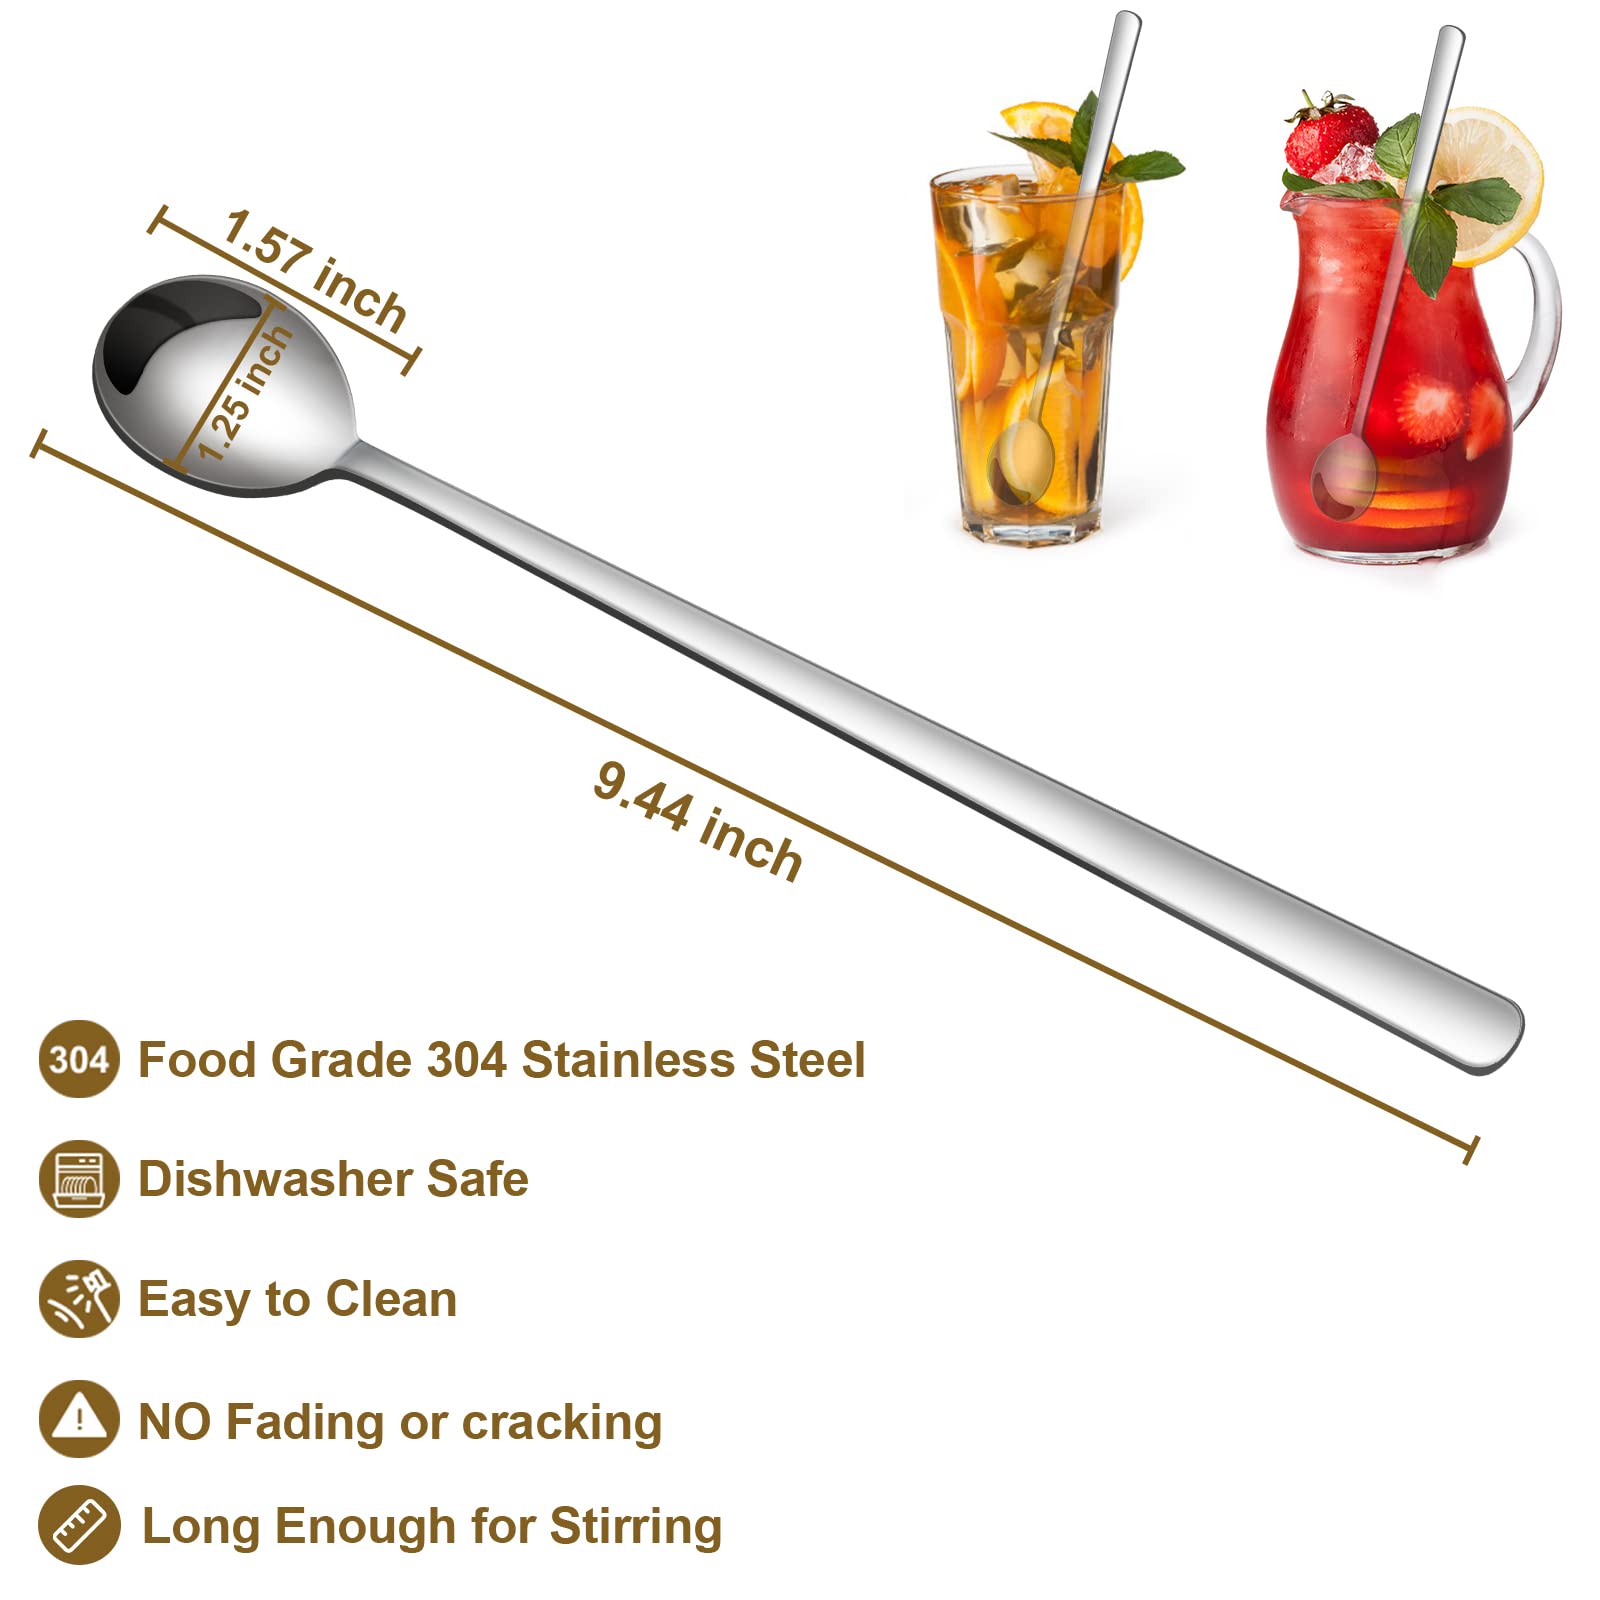 Long Handle Iced Tea Spoons, 304 Stainless Steel Teaspoons, 9.5 Inch Coffee Stirrers,Ice Cream Spoon,Cocktail Stirring Spoons, Set of 4 (Silver) (9.4 Inch, 4)